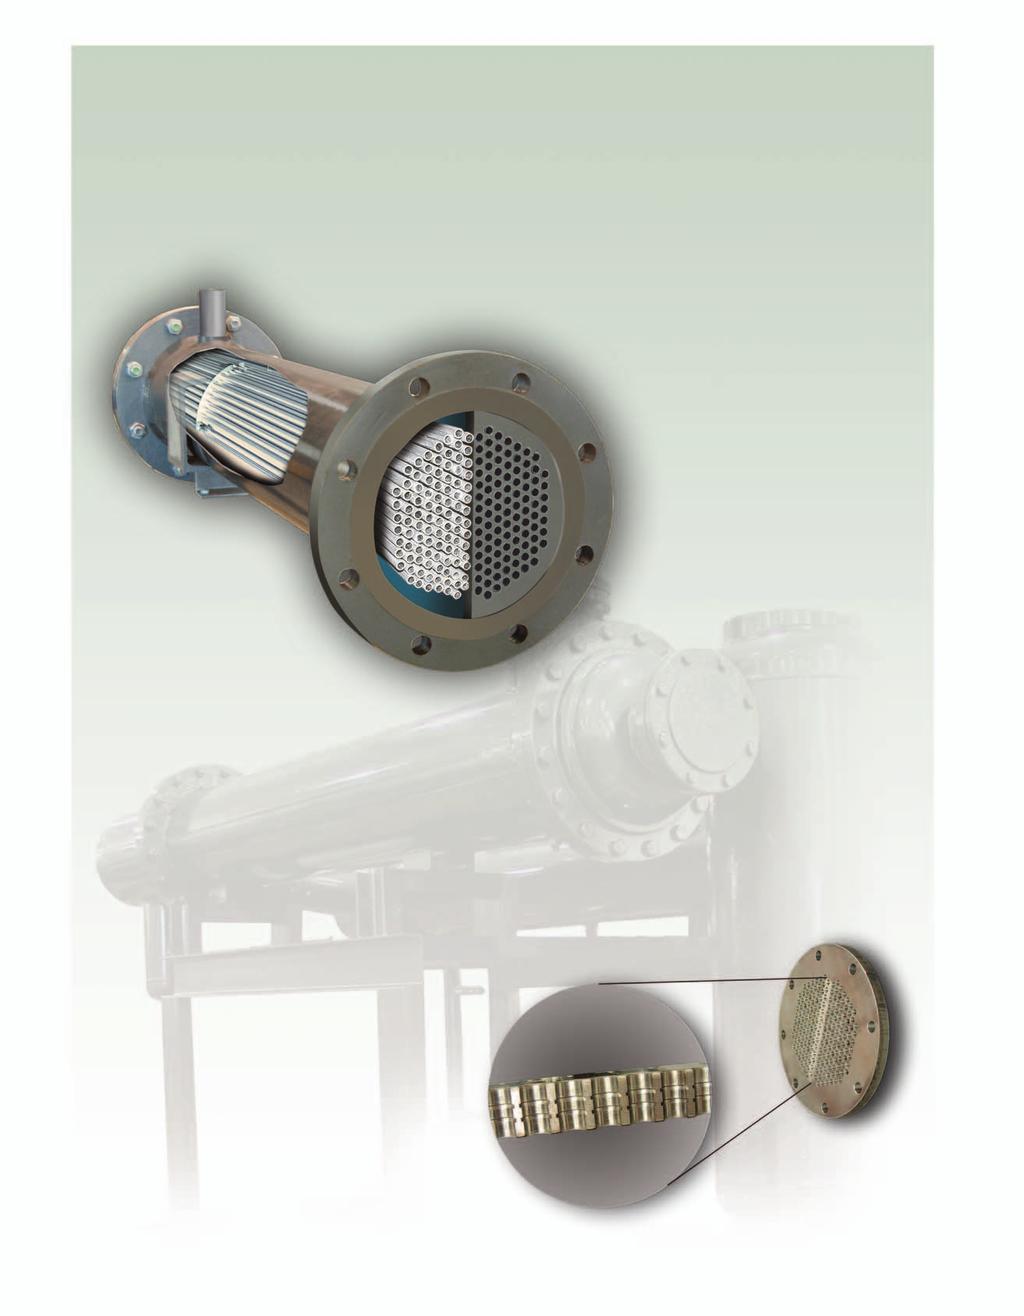 Heat Exchangers The Landfill/Digester Gas Series Dryers use high efficiency, non-fouling, tube and shell heat exchangers. They are simple, reliable, and time proven.